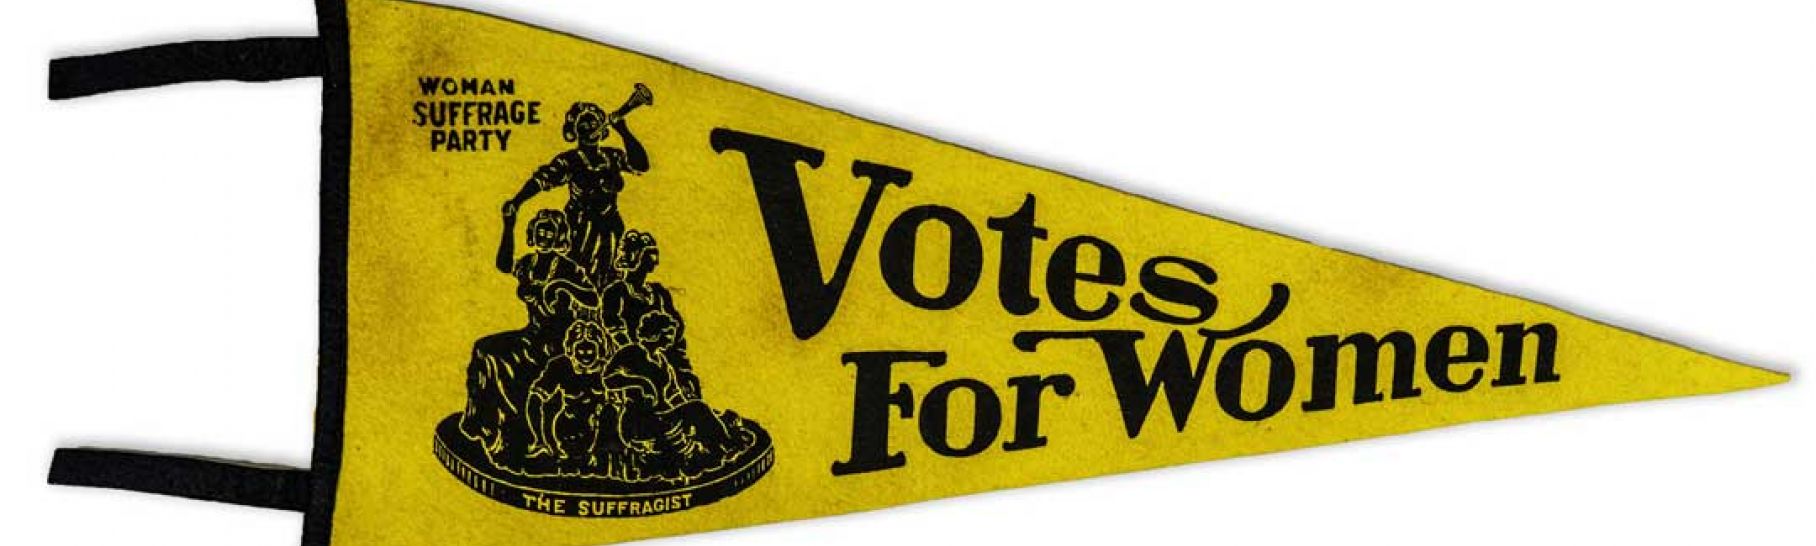 Woman Suffrage Pennant, 1910s